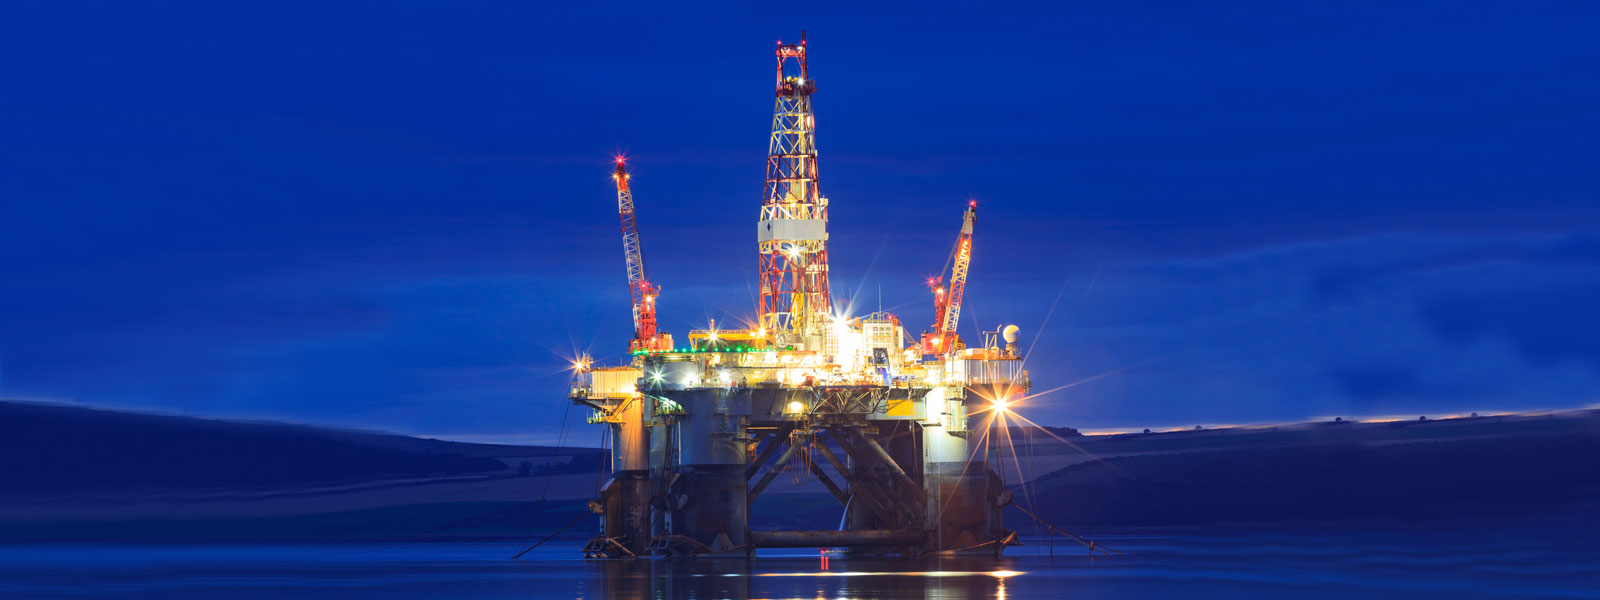 oil rig in the north sea at dusk lit up by lights